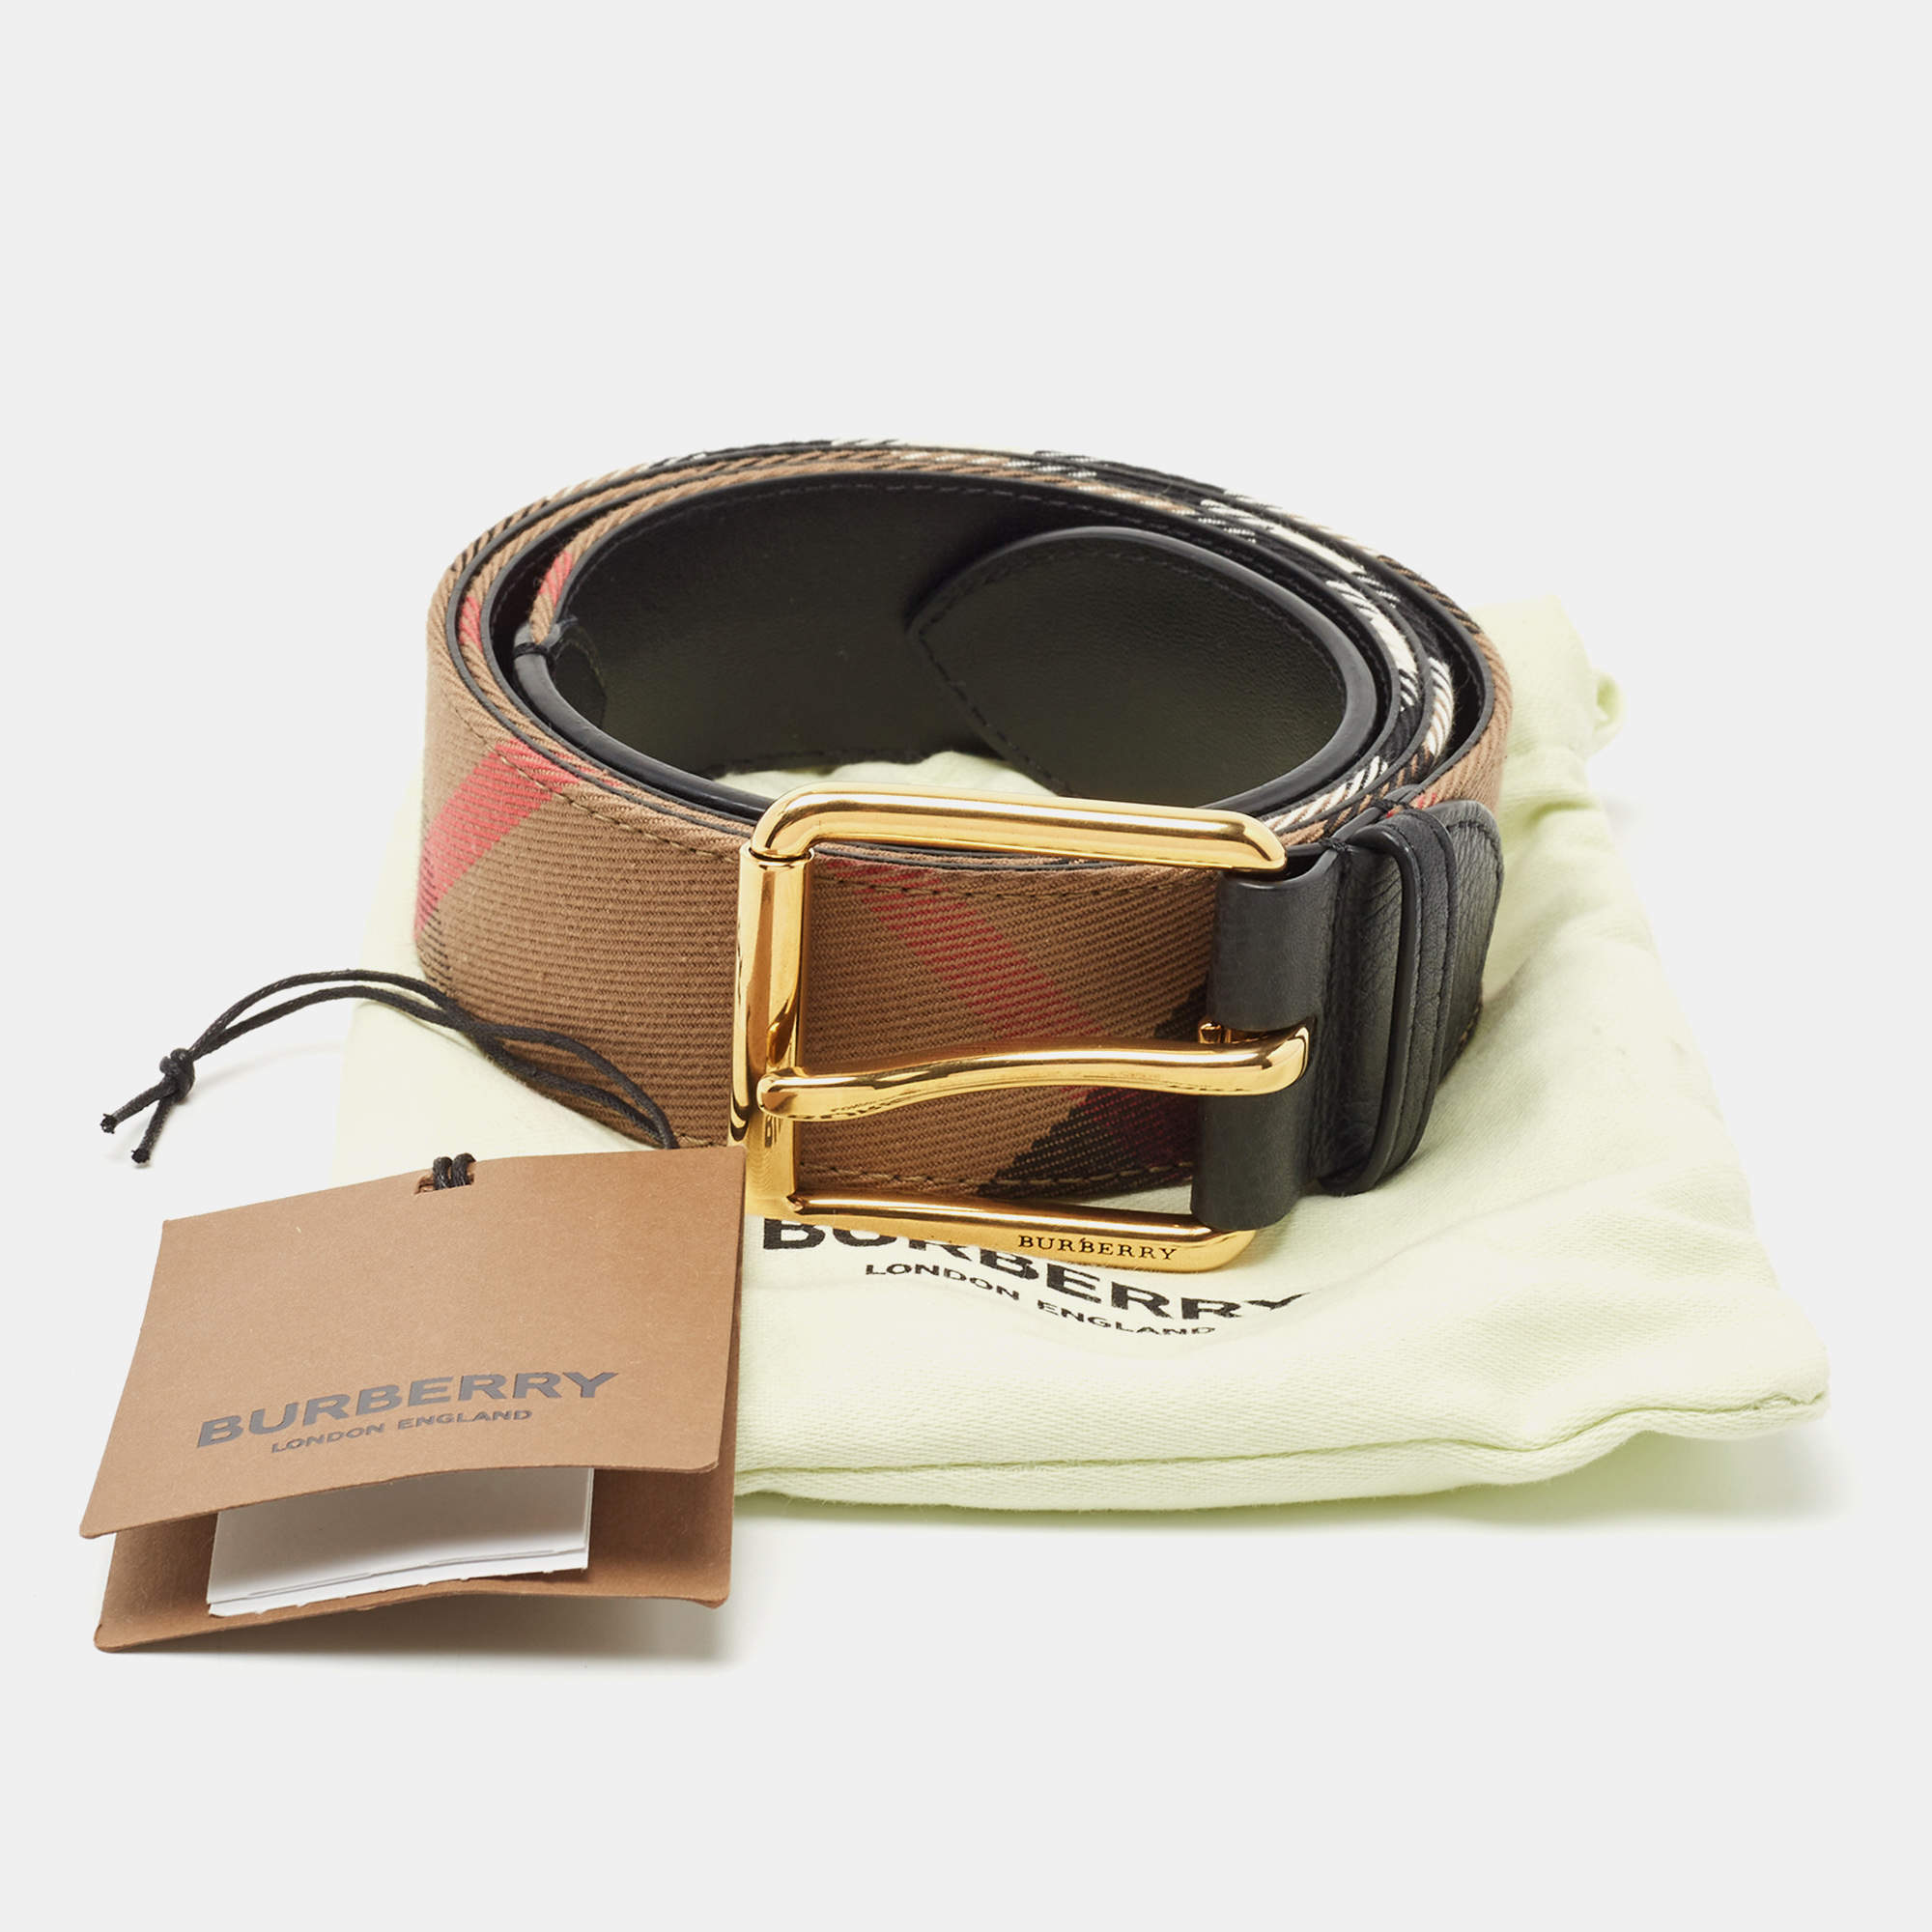 Burberry Black/Beige House Check Fabric and Leather Mark Buckle Belt 105CM  Burberry